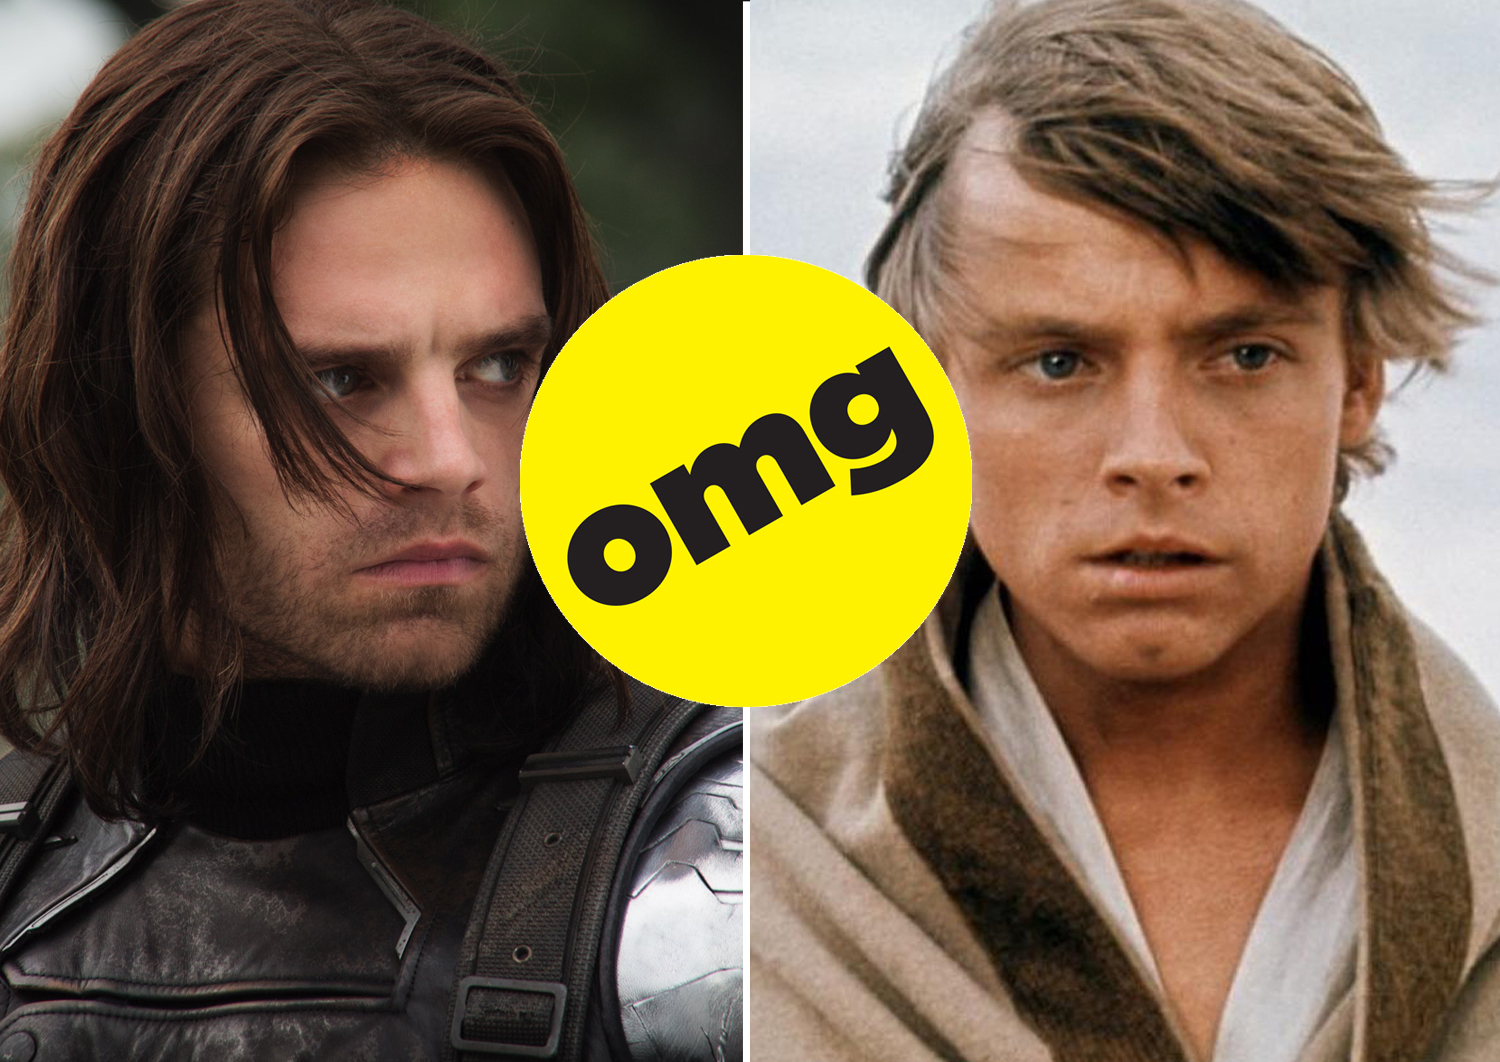 Screen Rant on X: After Sebastian Stan says Mark Hamill would have to be  involved for him to play a young Luke Skywalker, Hamill reminds us he  unfortunately has no say in